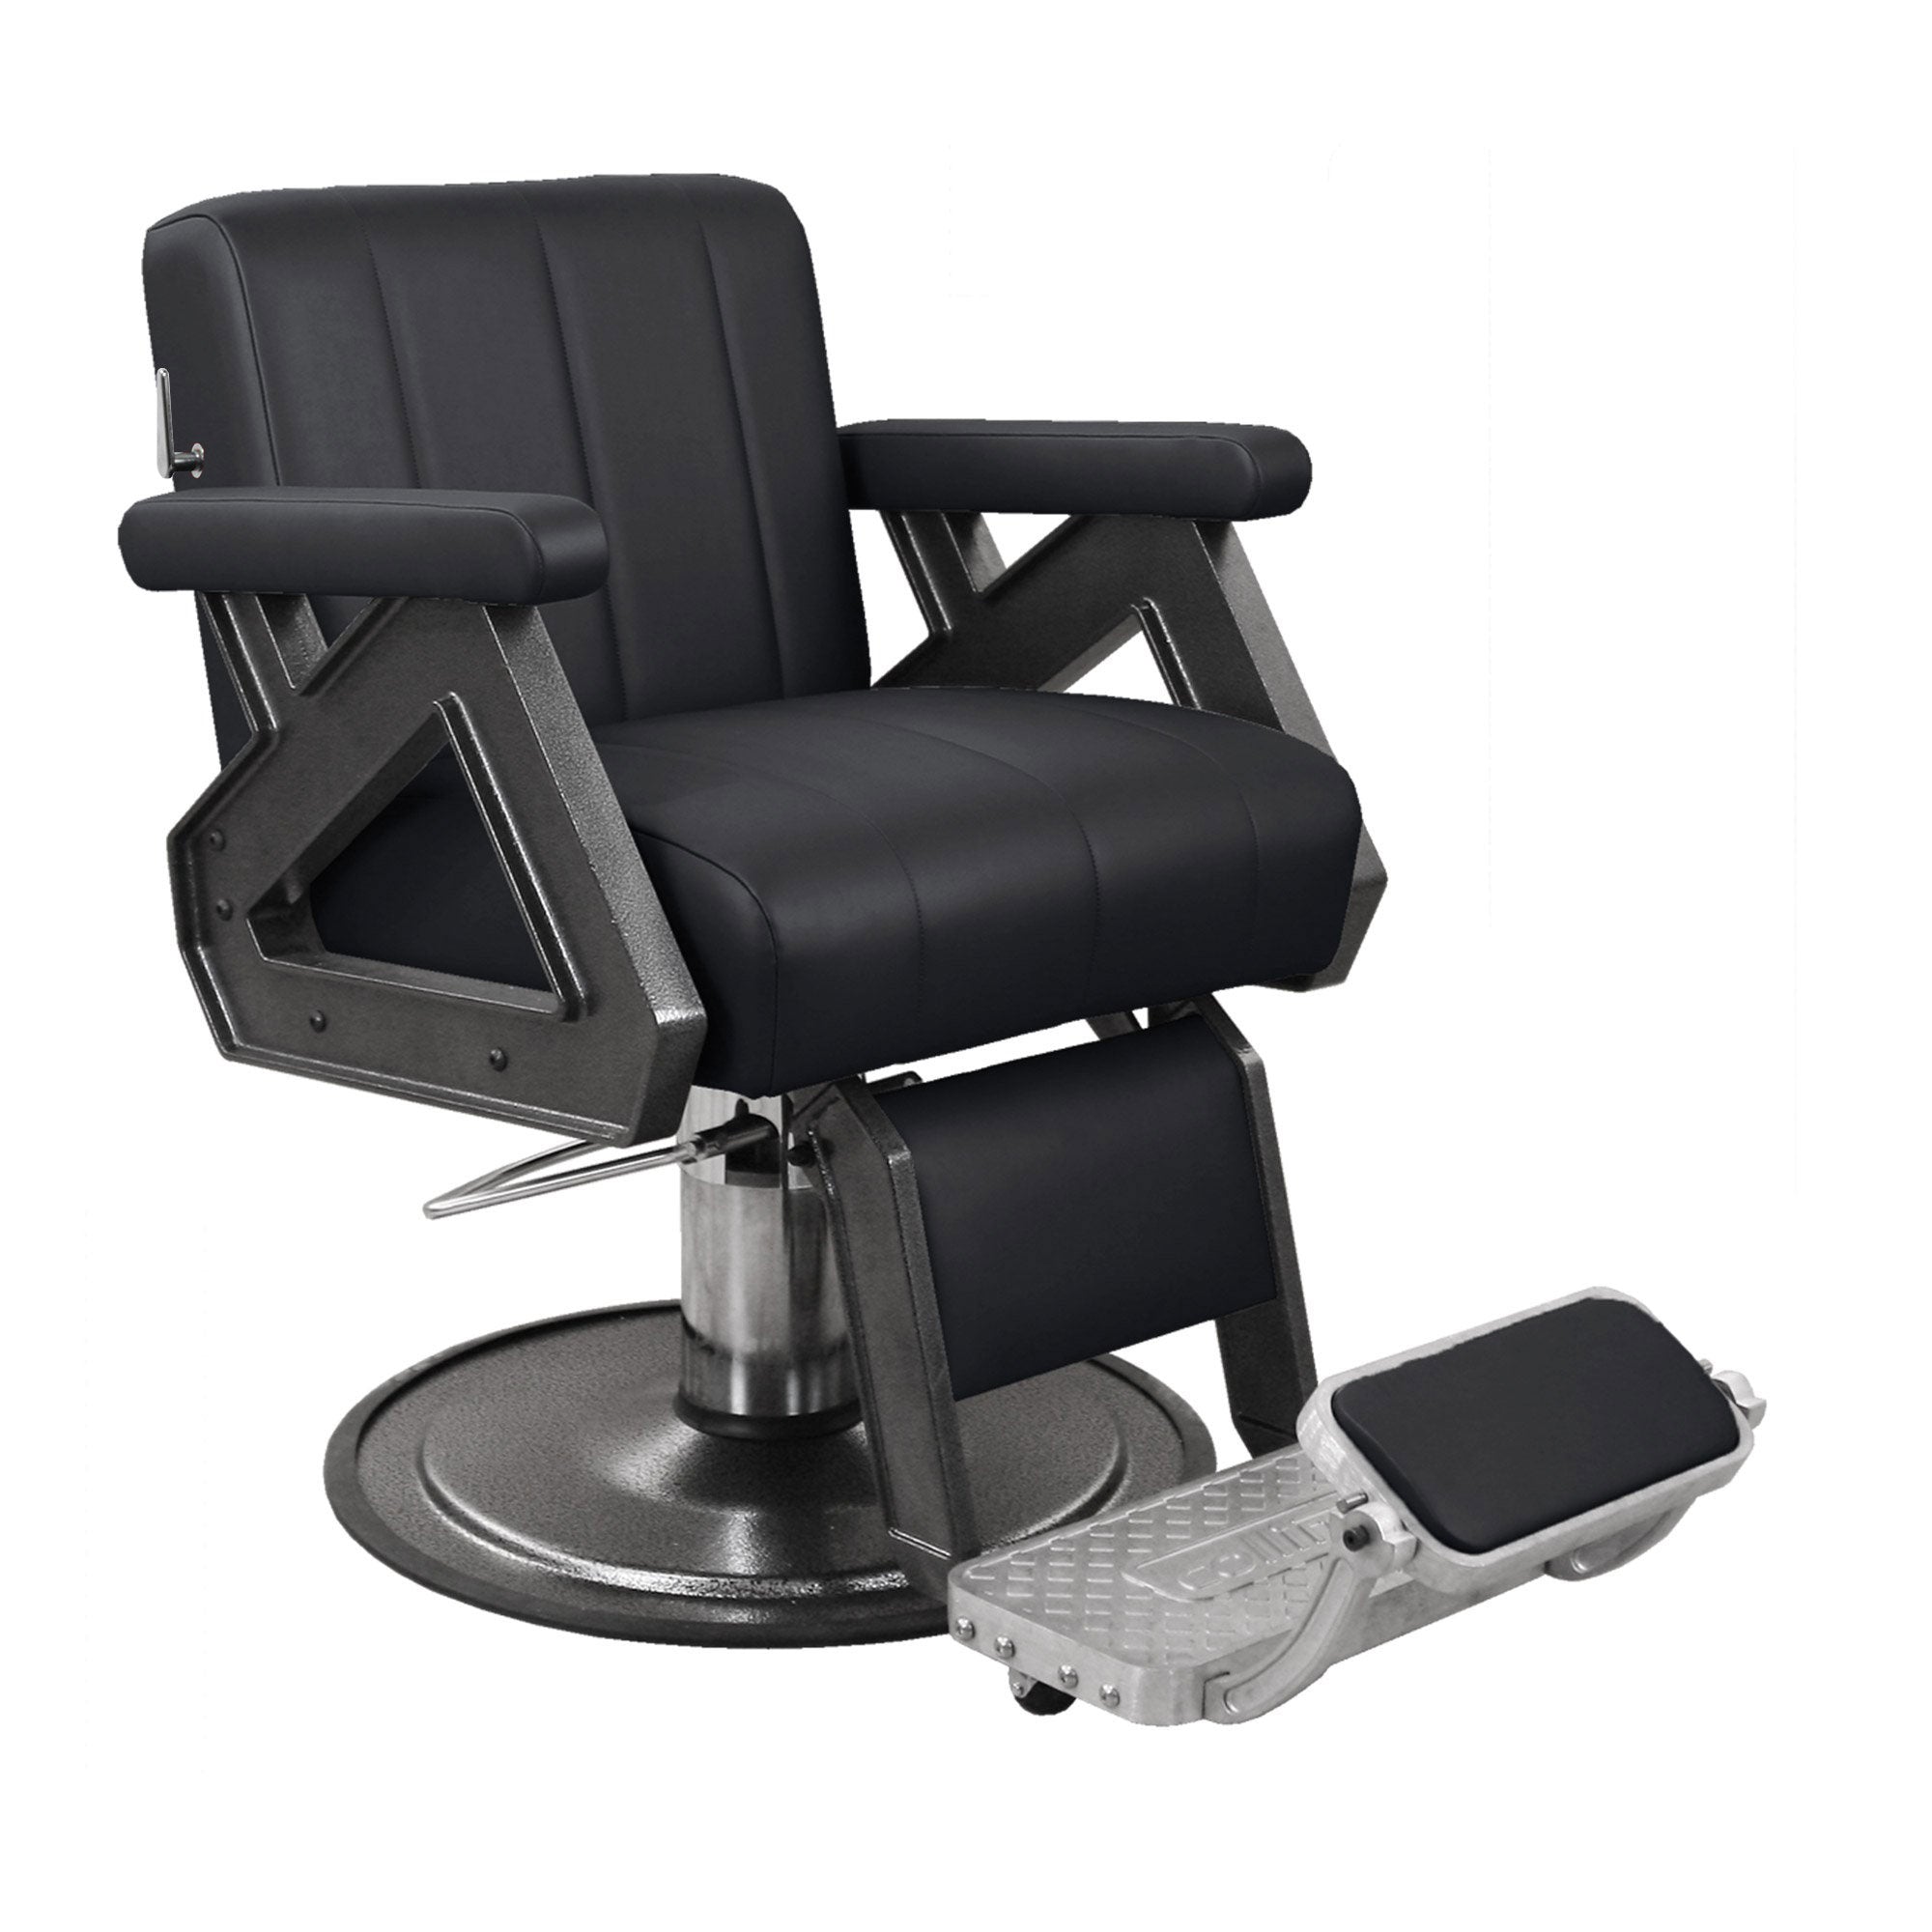 Caliber Barber Chair - Collins